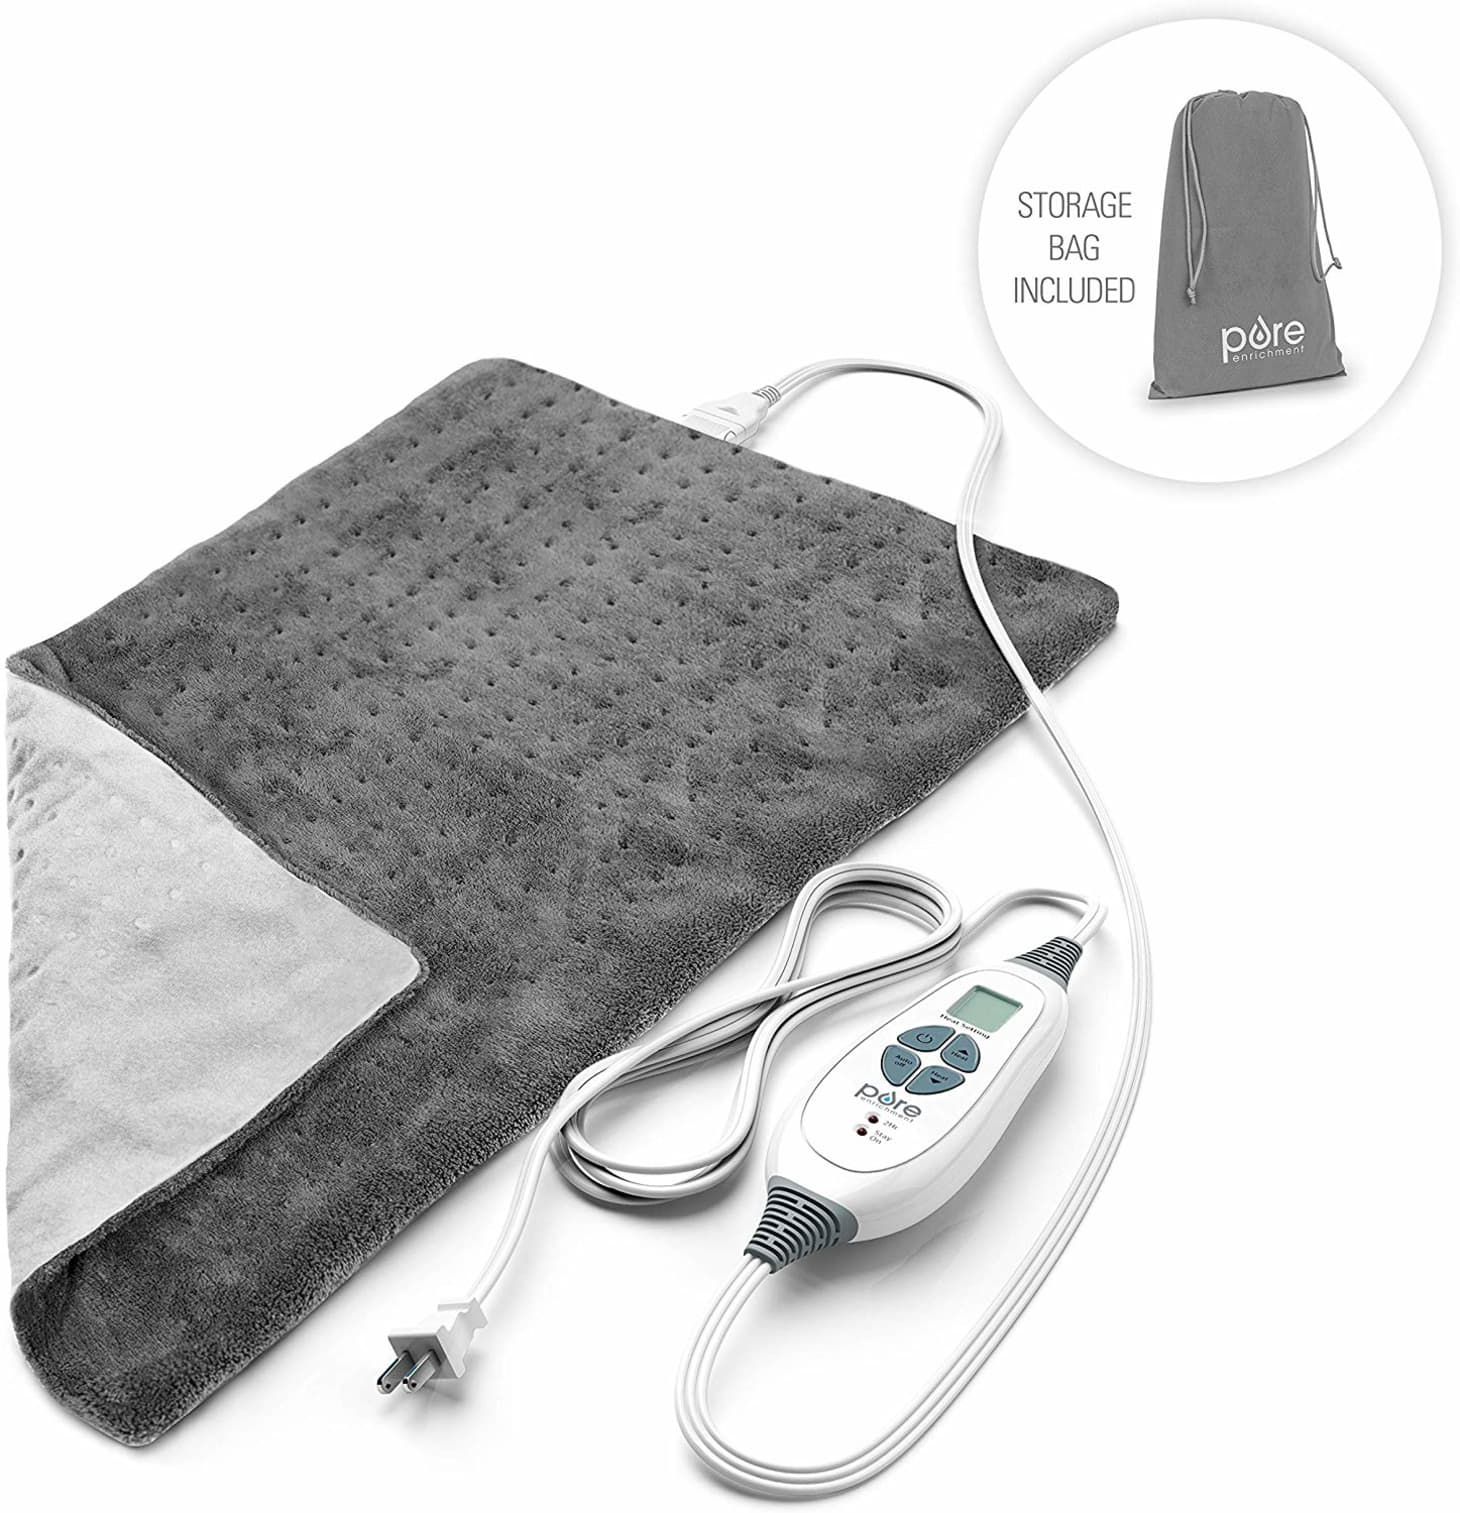 Best Amazon Heating Pad 2020 Apartment Therapy